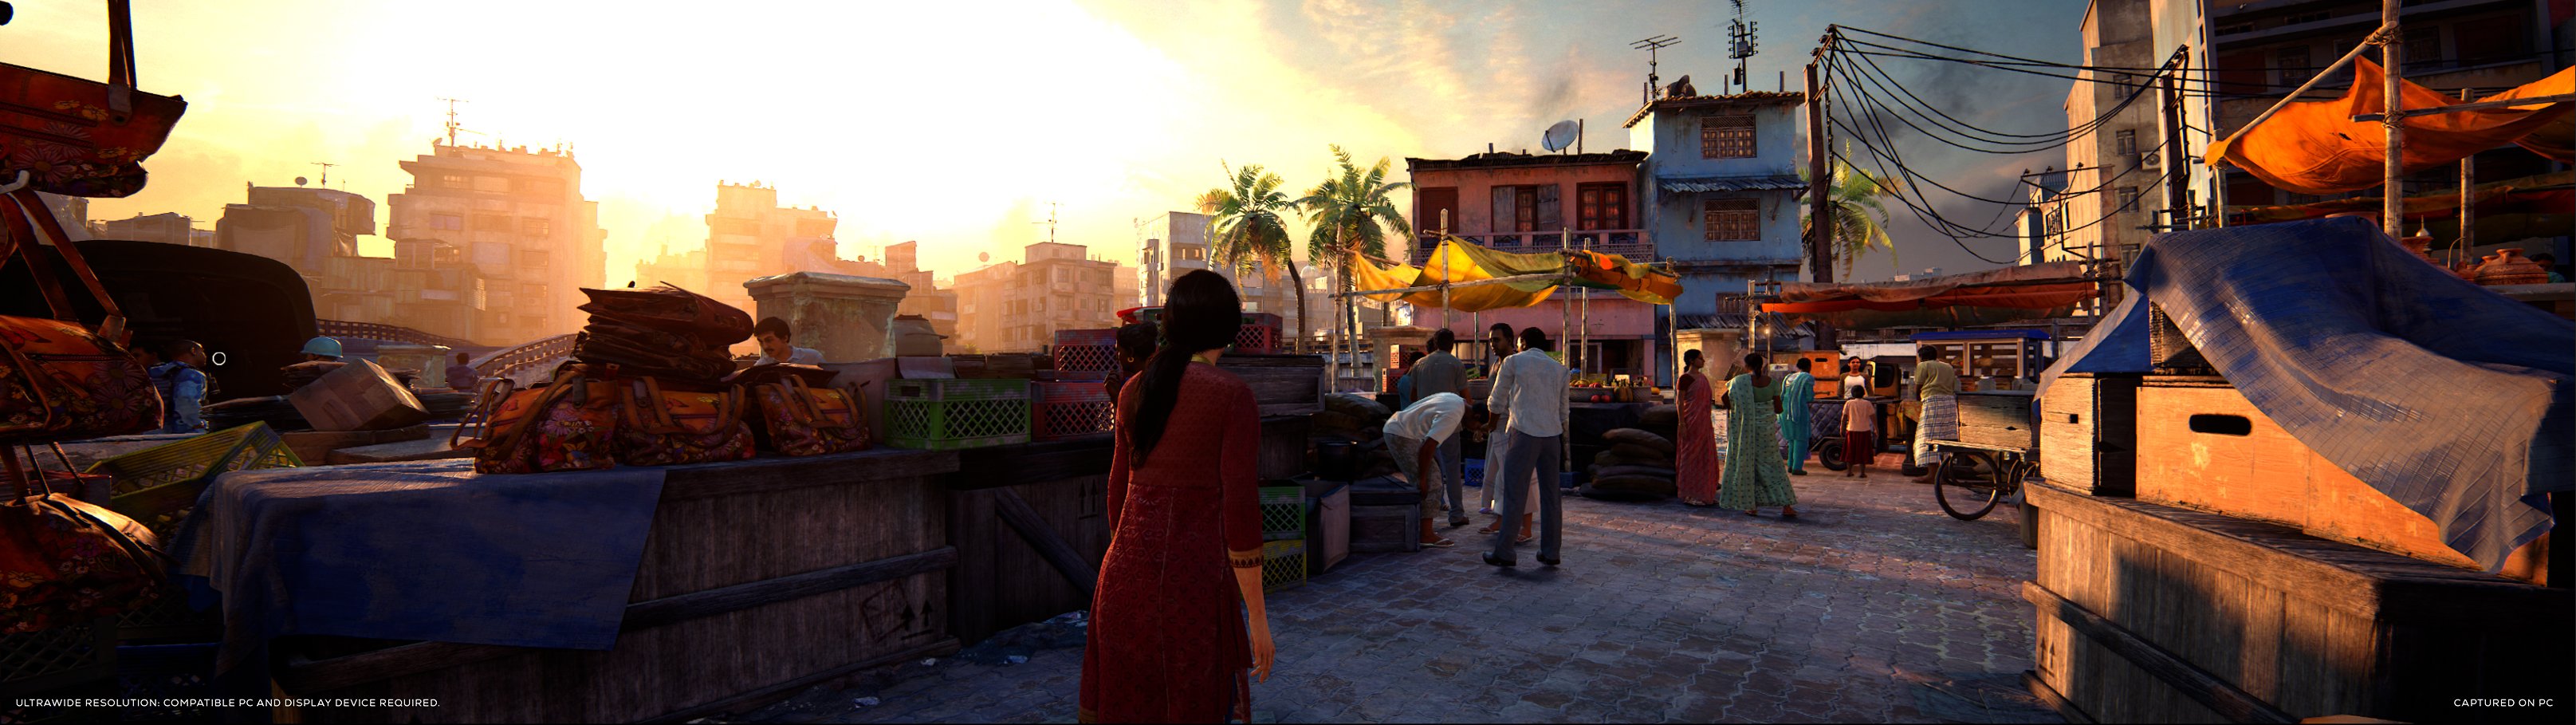 Uncharted: Legacy of Thieves' Collection: Glorious 21:9 Ultrawide PC  Gameplay